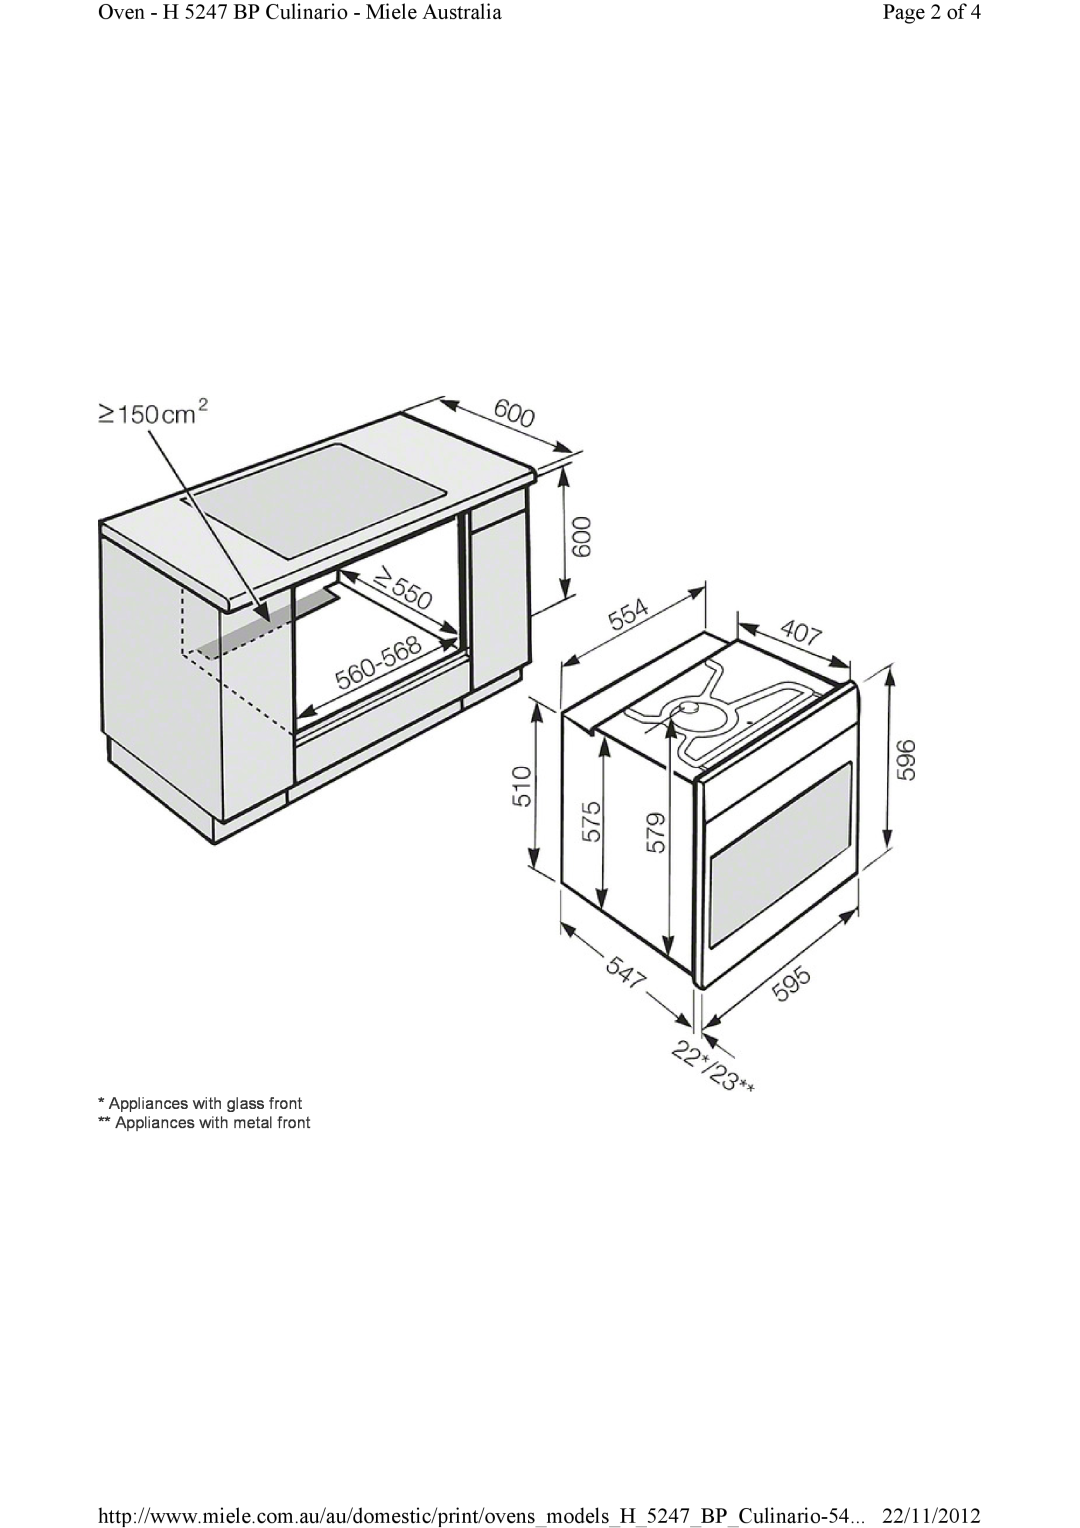 Miele installation instructions Page 2 of, Oven - H 5247 BP Culinario - Miele Australia 